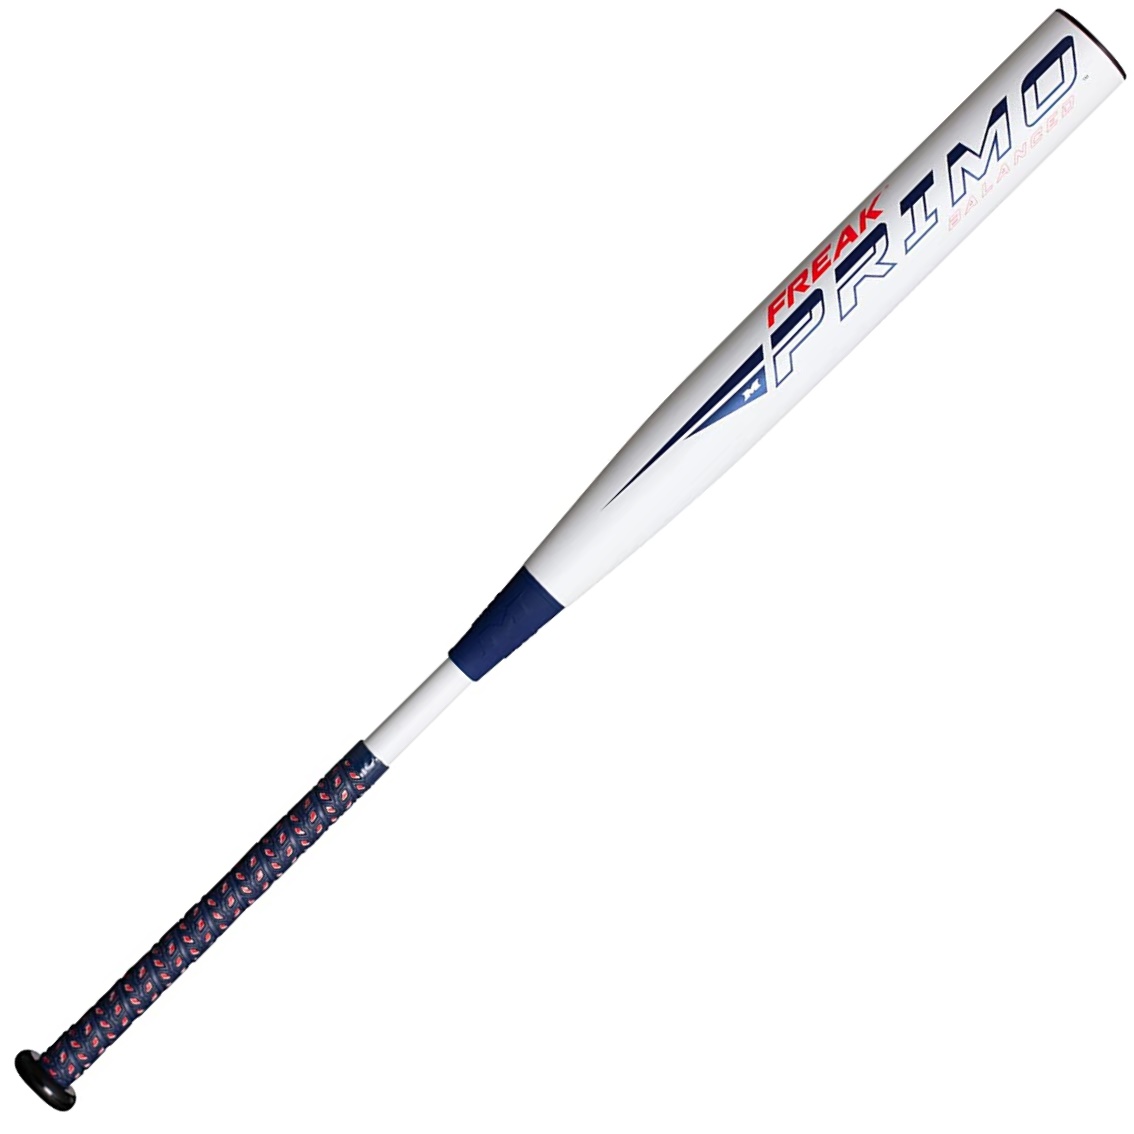 The Miken Freak Primo Balanced ASA Softball Bat is a top-performing bat designed for adult players in recreational and competitive slowpitch softball leagues. This bat features advanced technology and innovative design, making it the perfect choice for players looking to elevate their game. The Tetra-Core Technology optimizes performance by utilizing an inner core tube to increase compression, resulting in unmatched barrel responsiveness. The Sensi-Flex Vibration Reduction system maximizes energy transfer from the handle to the barrel, increasing bat head speed through the hitting zone while also eliminating vibration. The 14-inch barrel of the Miken Freak Primo extends the sweet spot, providing players with a larger area to make contact with the ball. The 100 COMP composite fibers used in the construction of this bat deliver legendary performance and barrel durability, ensuring that it will last for many seasons to come. The A1 Knob, with its smaller profile, provides players with increased comfort at the plate, allowing them to focus on their swing without being distracted by discomfort in their hands. This bat is approved for play in all USA/ASA leagues, making it legal for use in all official slowpitch softball leagues. Whether you're a beginner or an experienced player, the Miken Freak Primo Balanced ASA Softball Bat is the perfect choice for anyone looking to improve their performance on the field.